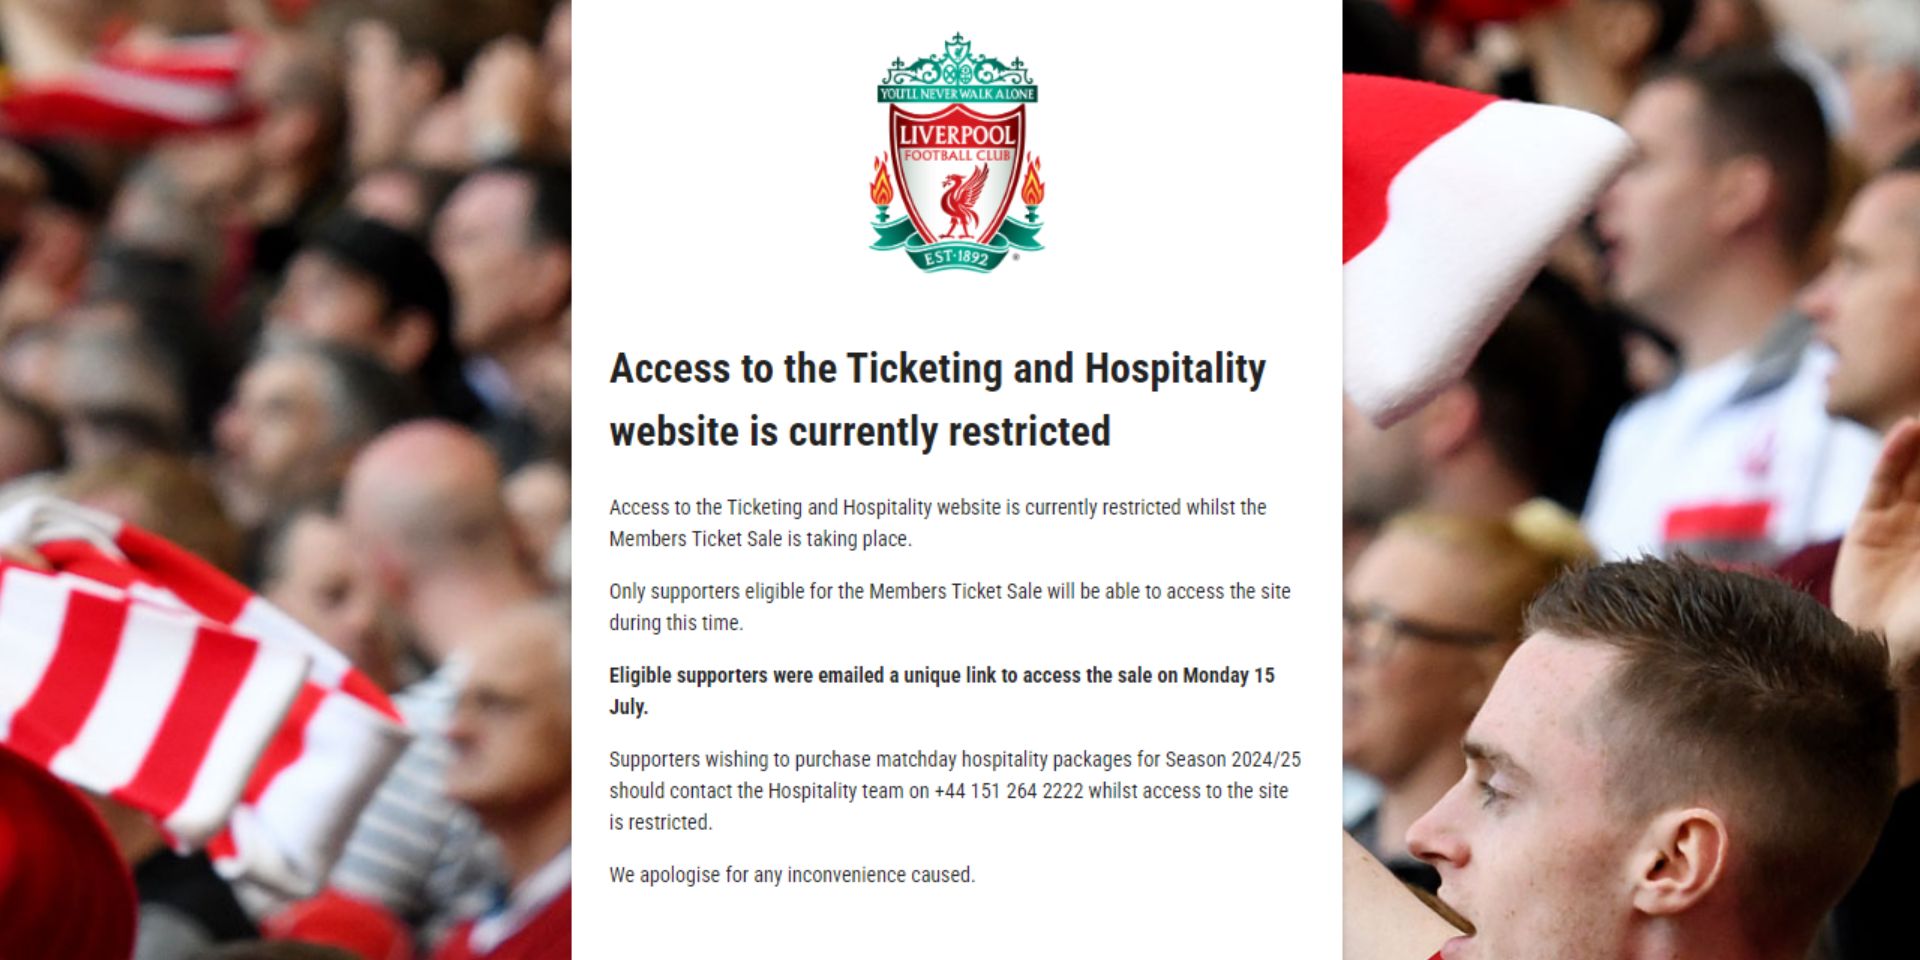 Statement released after Liverpool members sale fails once again; time for change